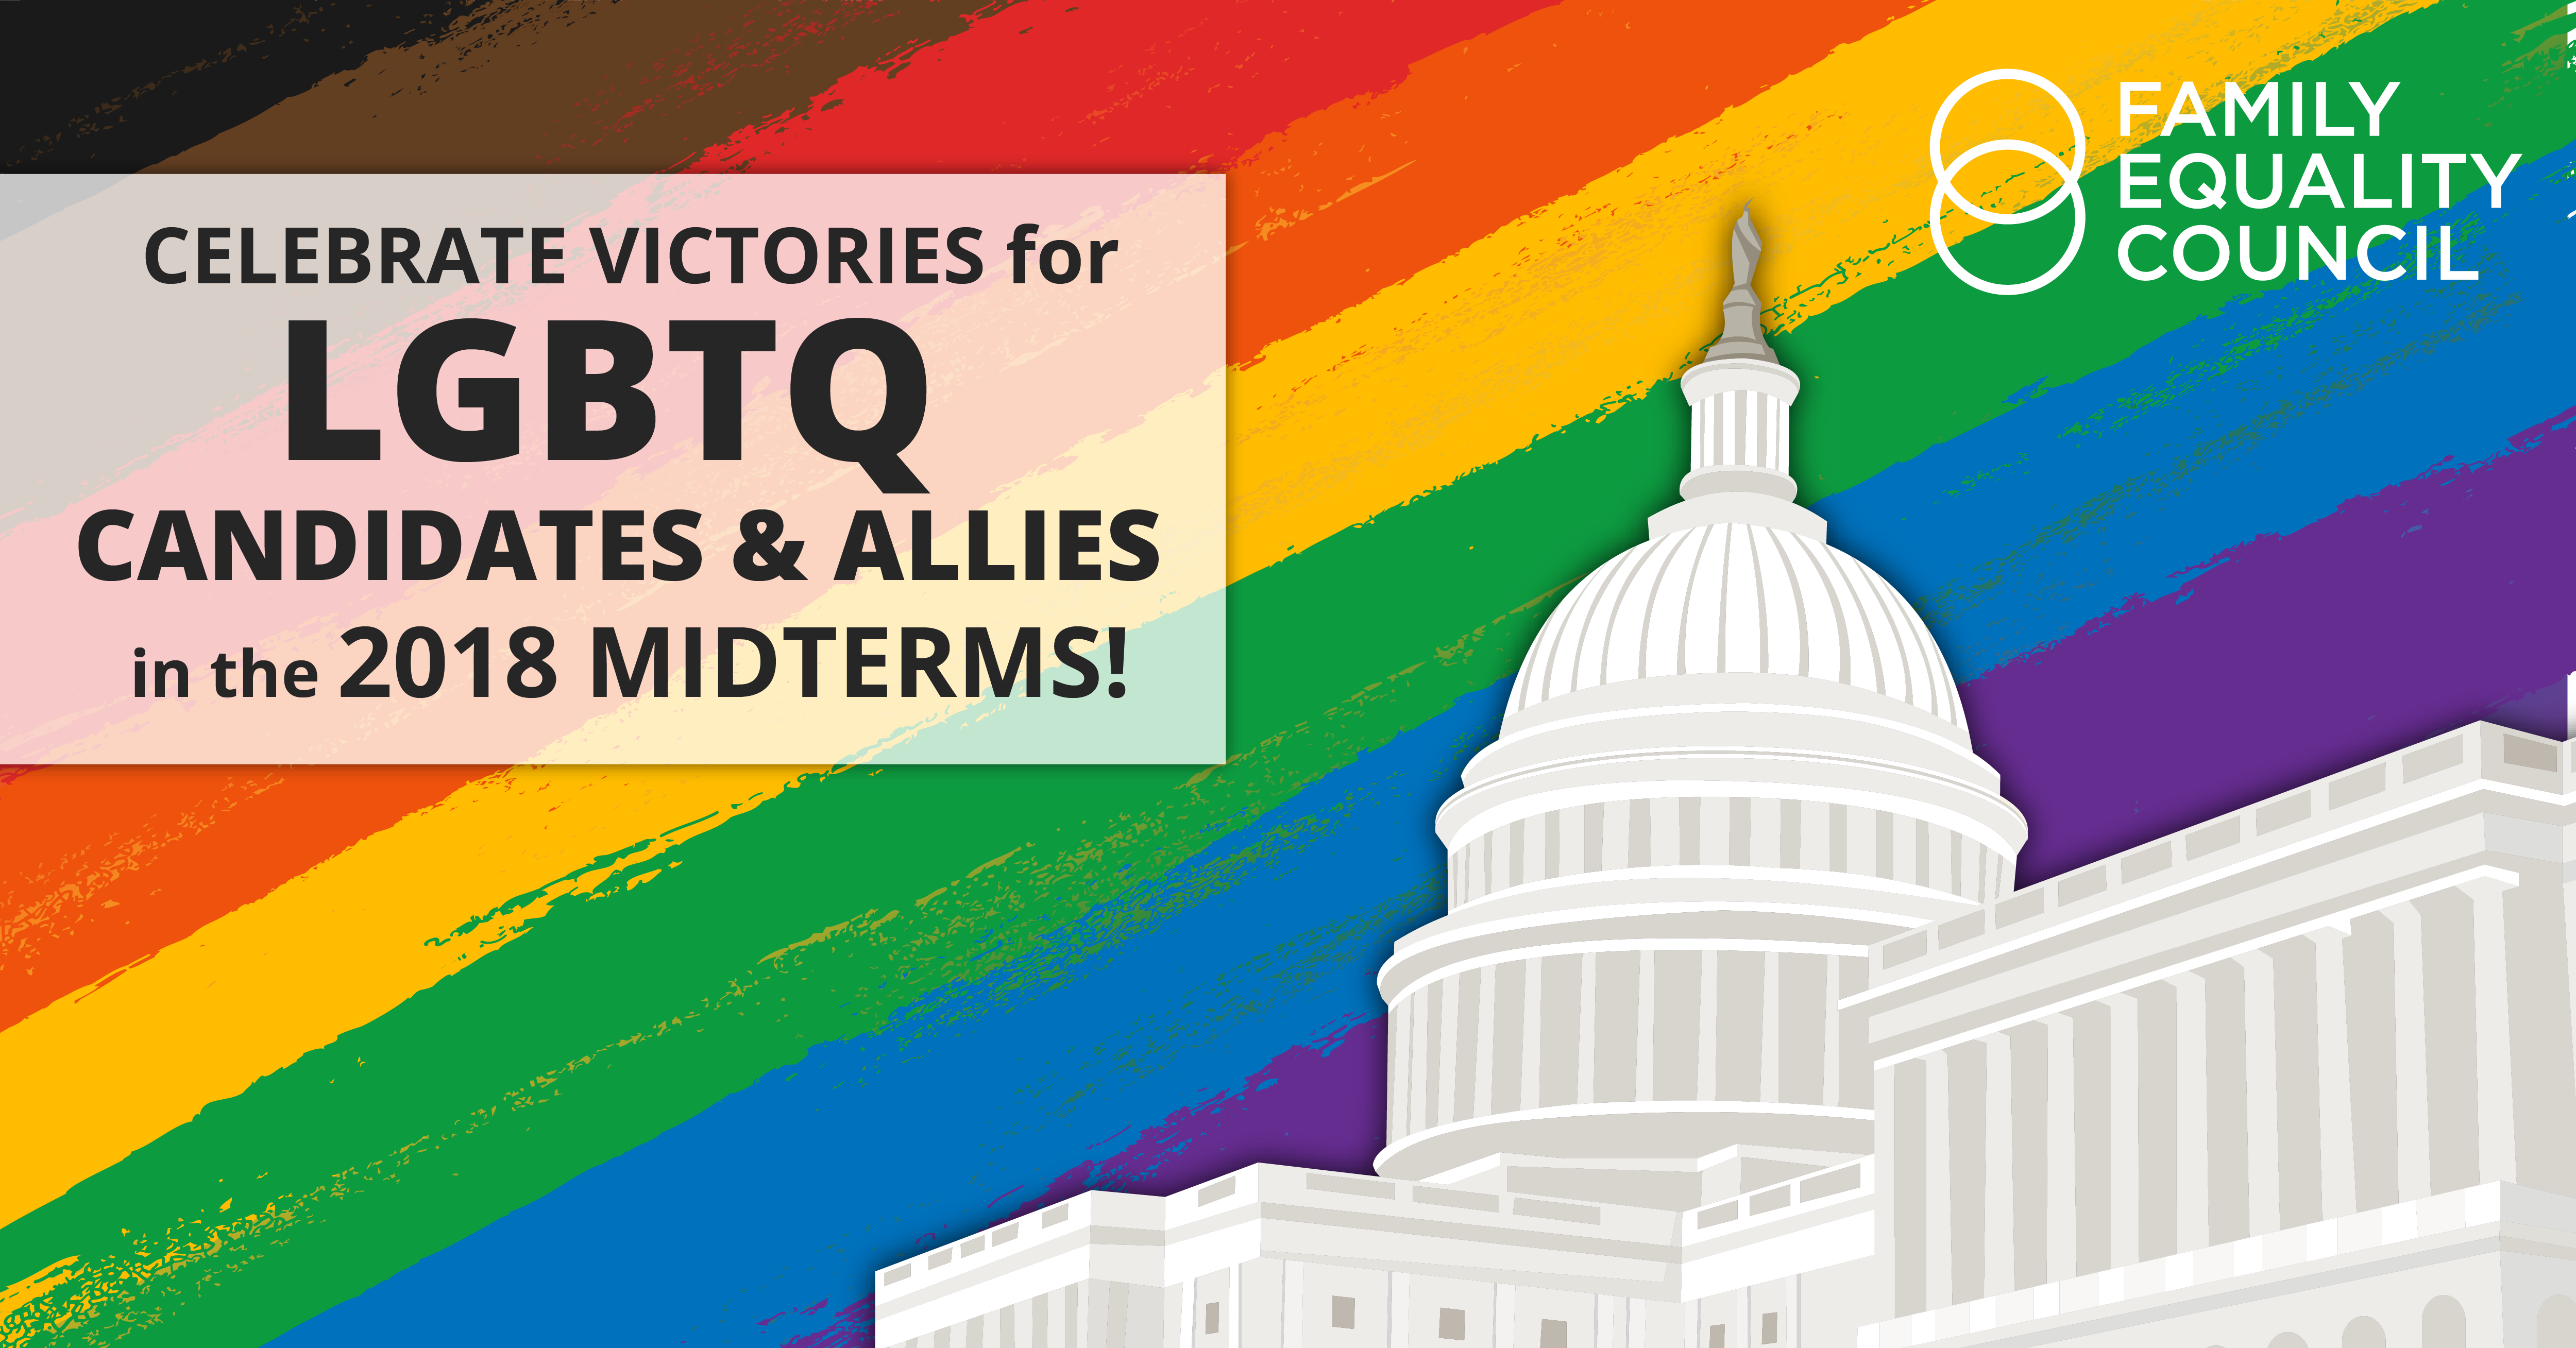 Celebrate LGBTQ Victories in the Midterms!